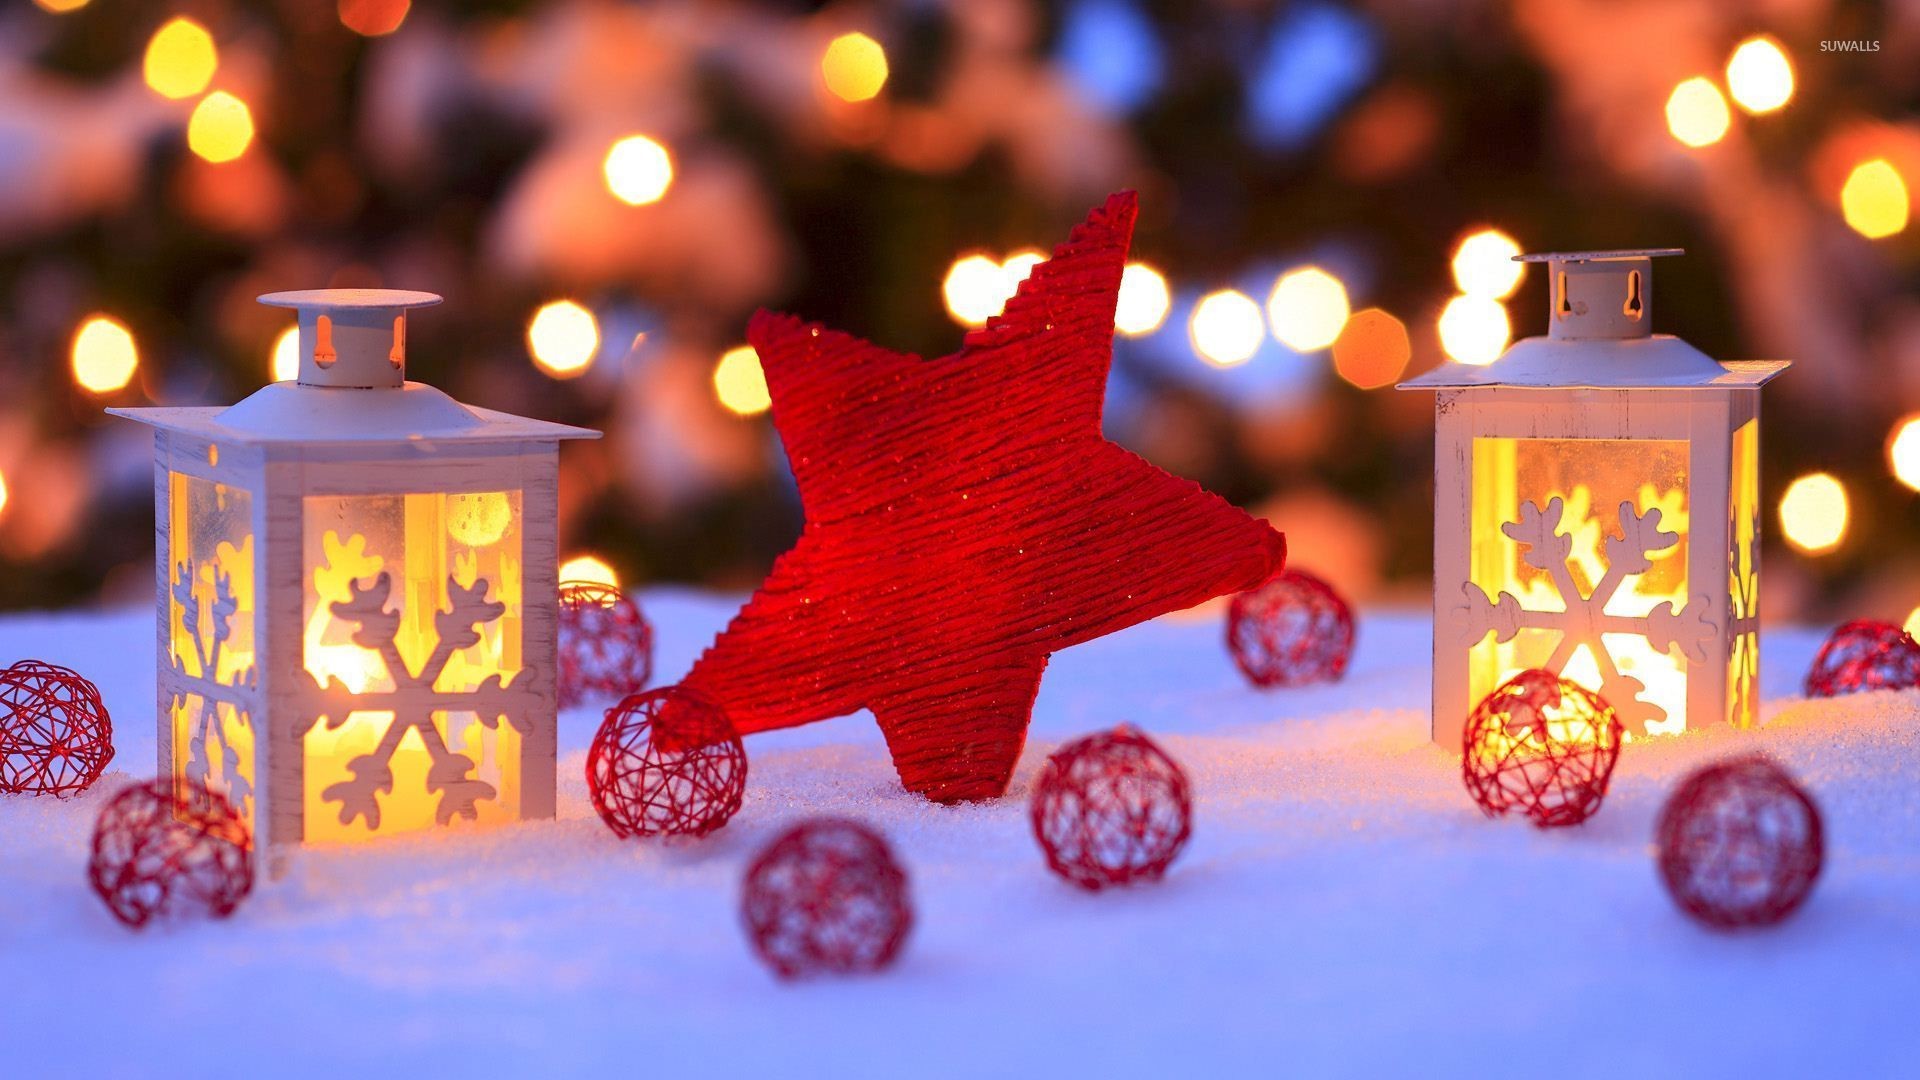 1920x1080 Red star in the snow by the candles wallpaper Â· Holidays Â· Christmas Â· Star  Â· Candle Â·  ...